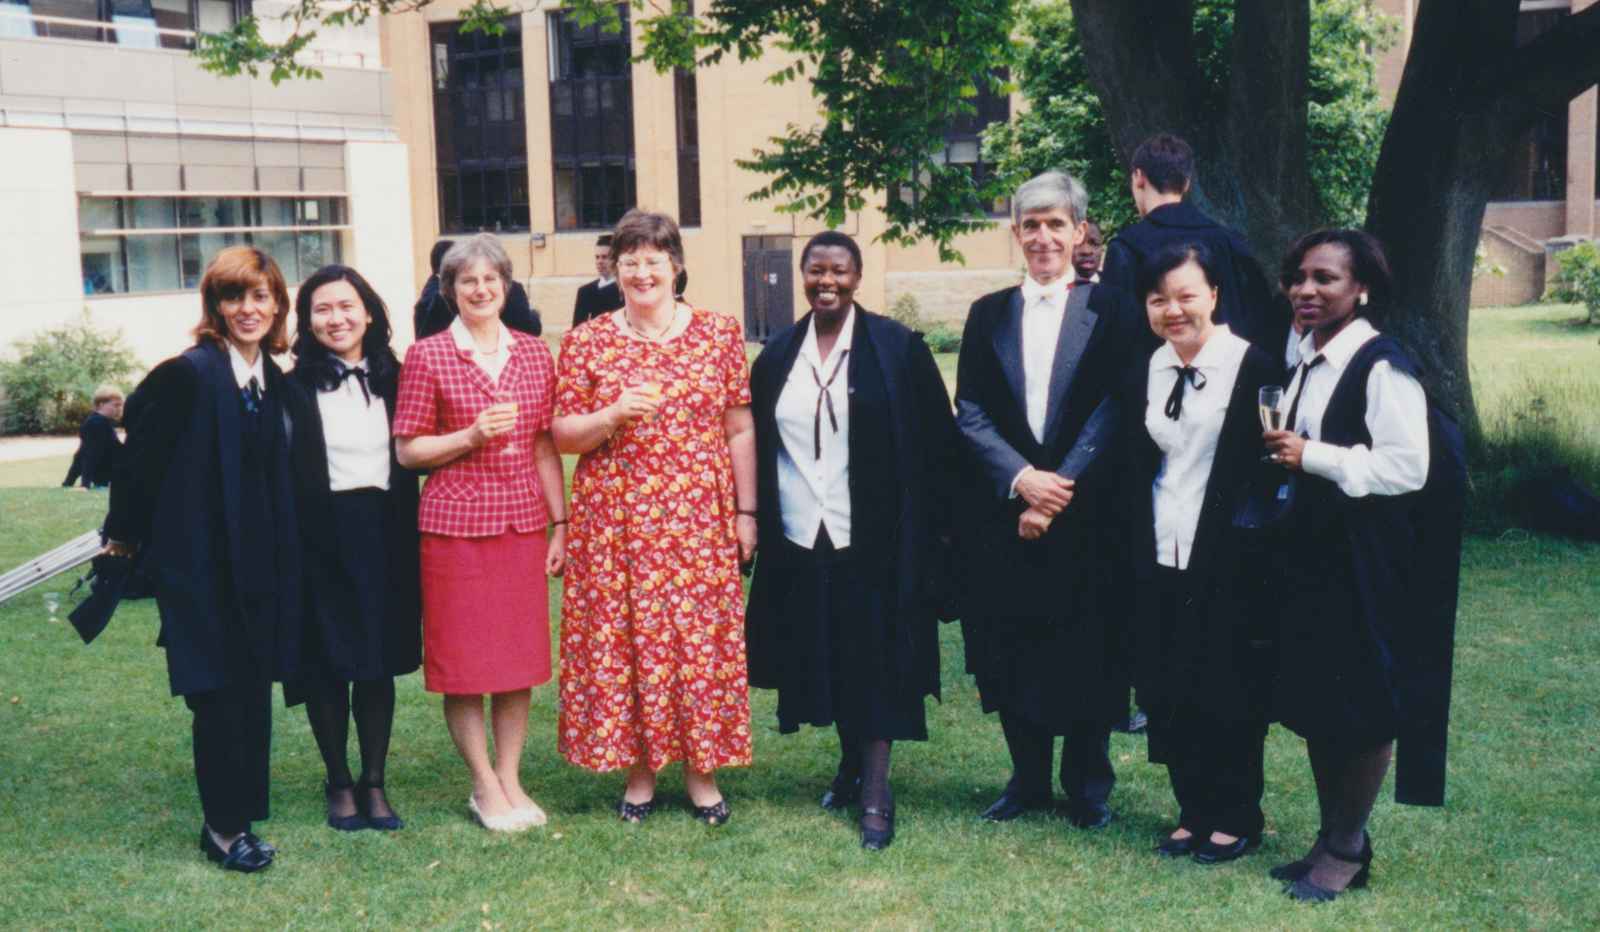 Ambassador Anna Aghadjanian (1st from left); Alison Nicol, former Administrator (3rd from left); Glenis Collins, former Secretary (4th from left); Ambassador Christopher Long, former Director of the Programme (3rd from right)